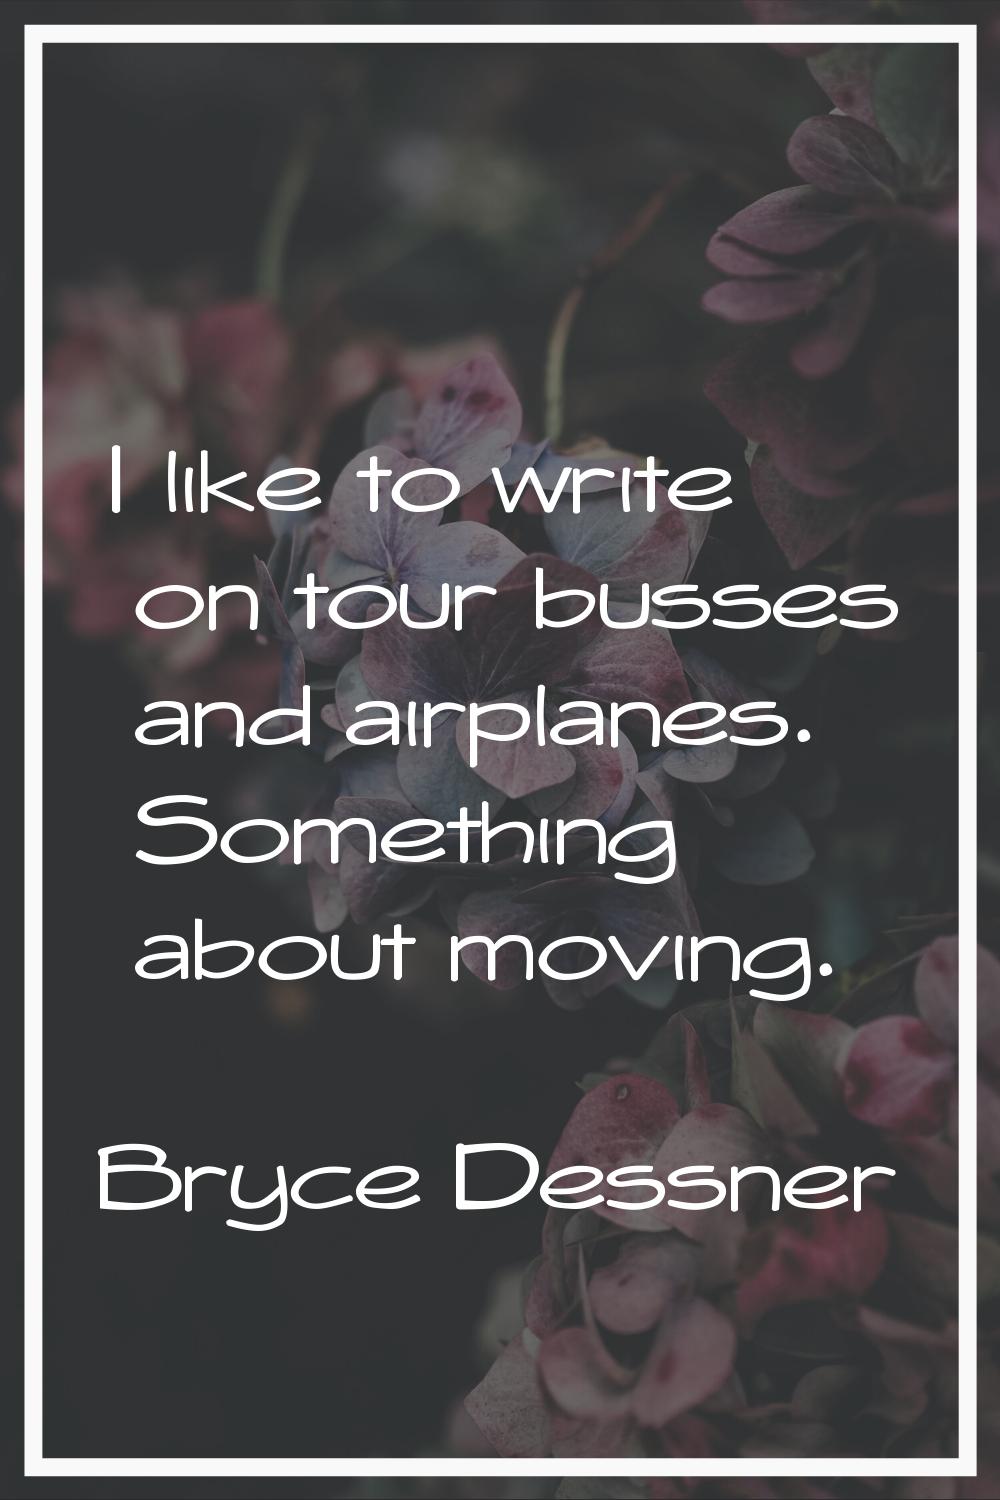 I like to write on tour busses and airplanes. Something about moving.